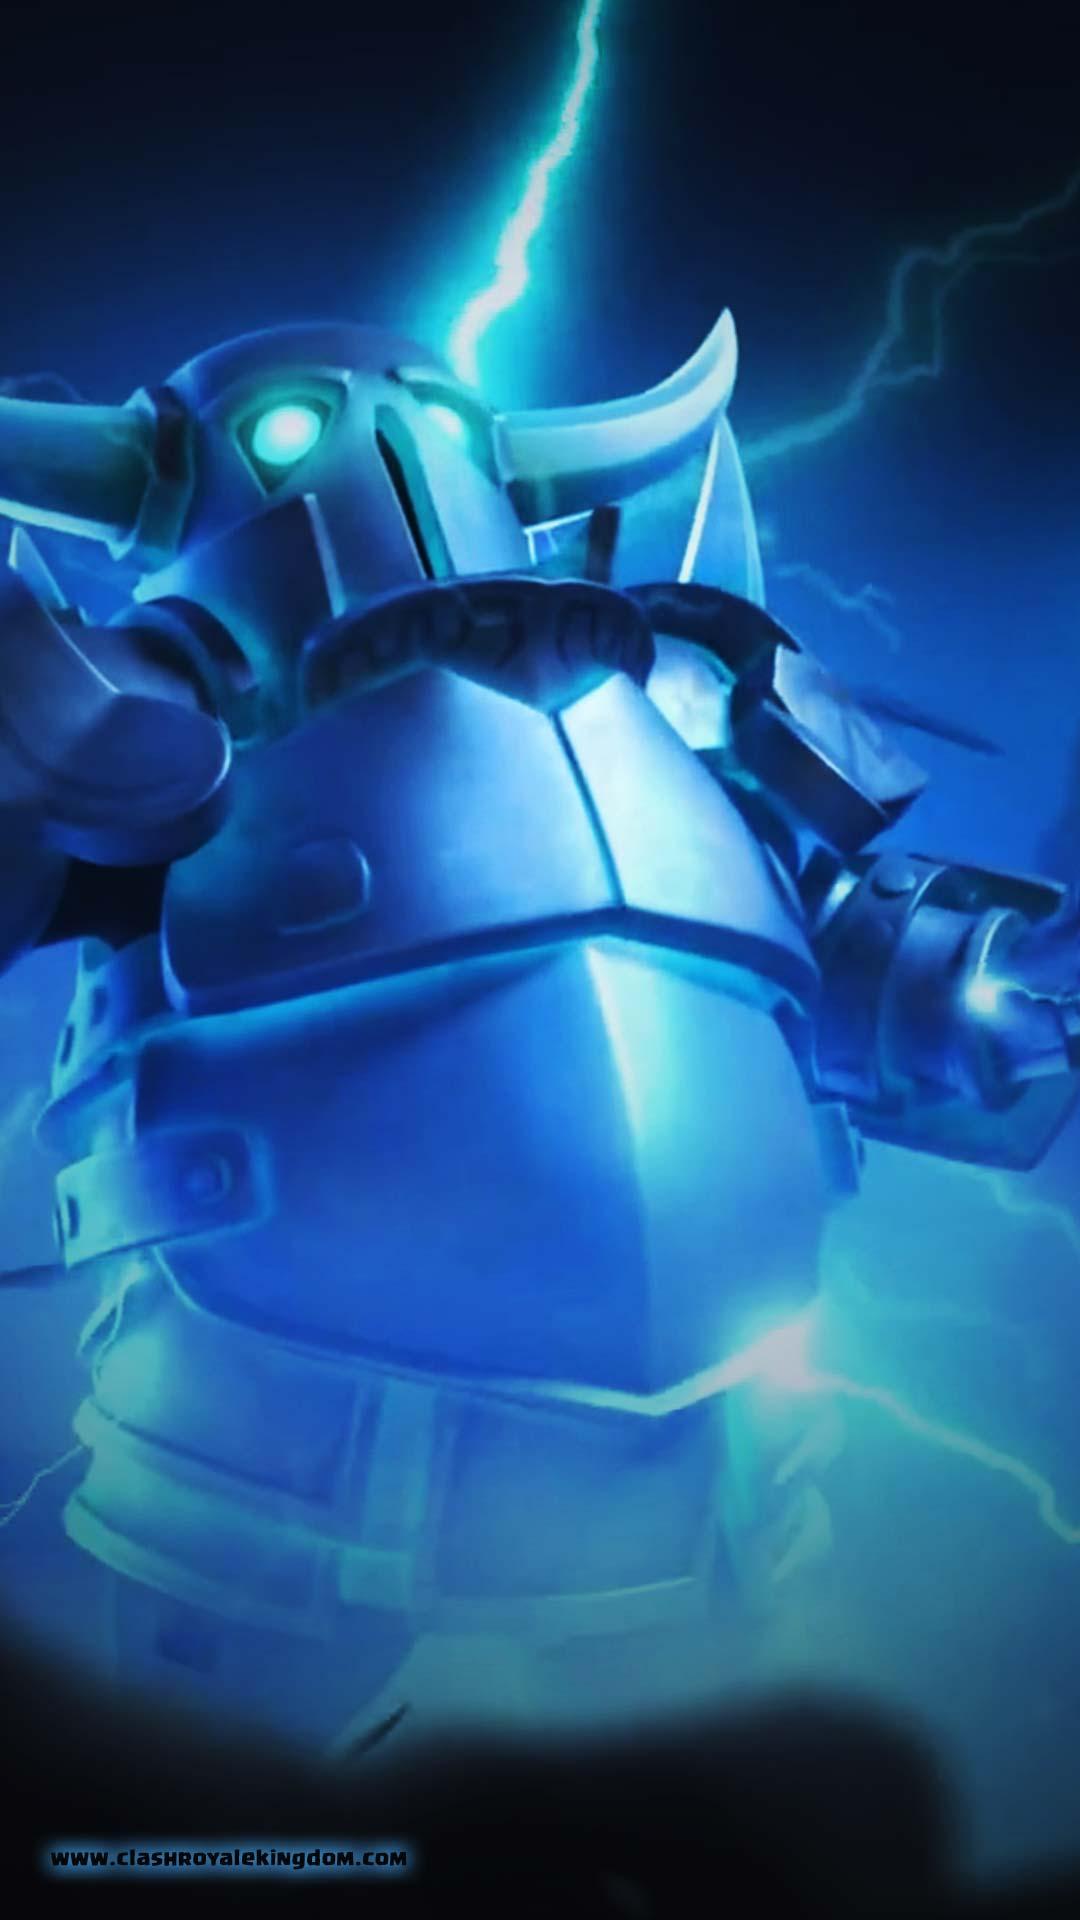 1080 x 1920 · jpeg - Cool Clash Royale Wallpapers / Please contact us if you want to publish ...